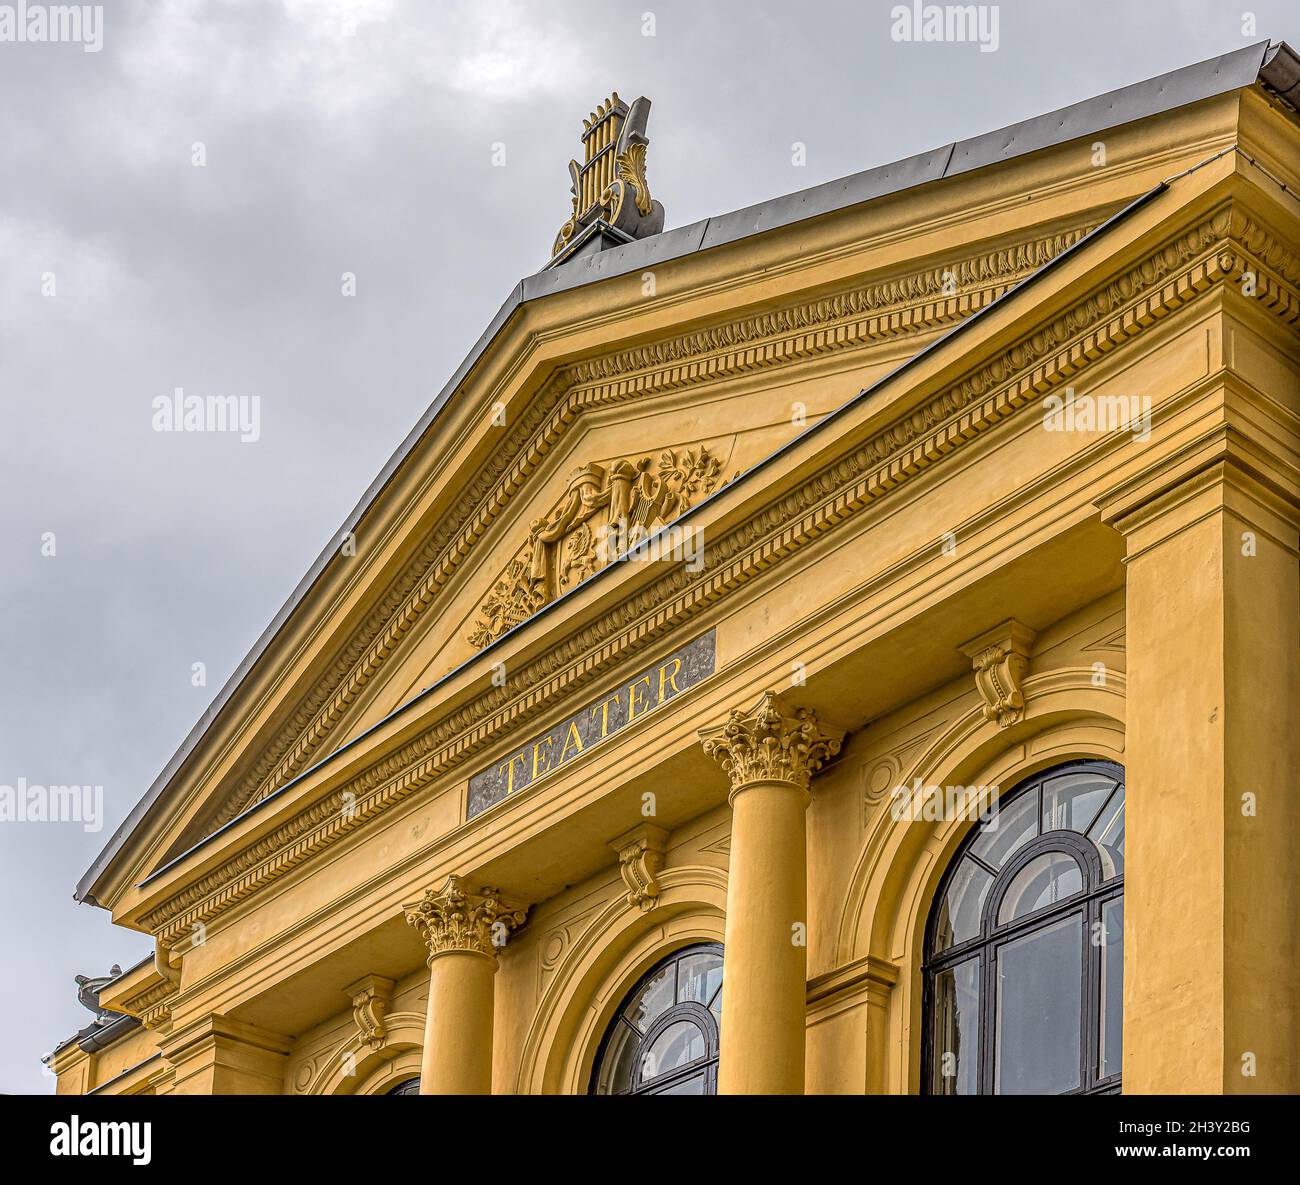 the Historical theater in Ystad from 1894 is a beautiful neo-classical building, Ystad, Sweden, September 15, 2021 Stock Photo